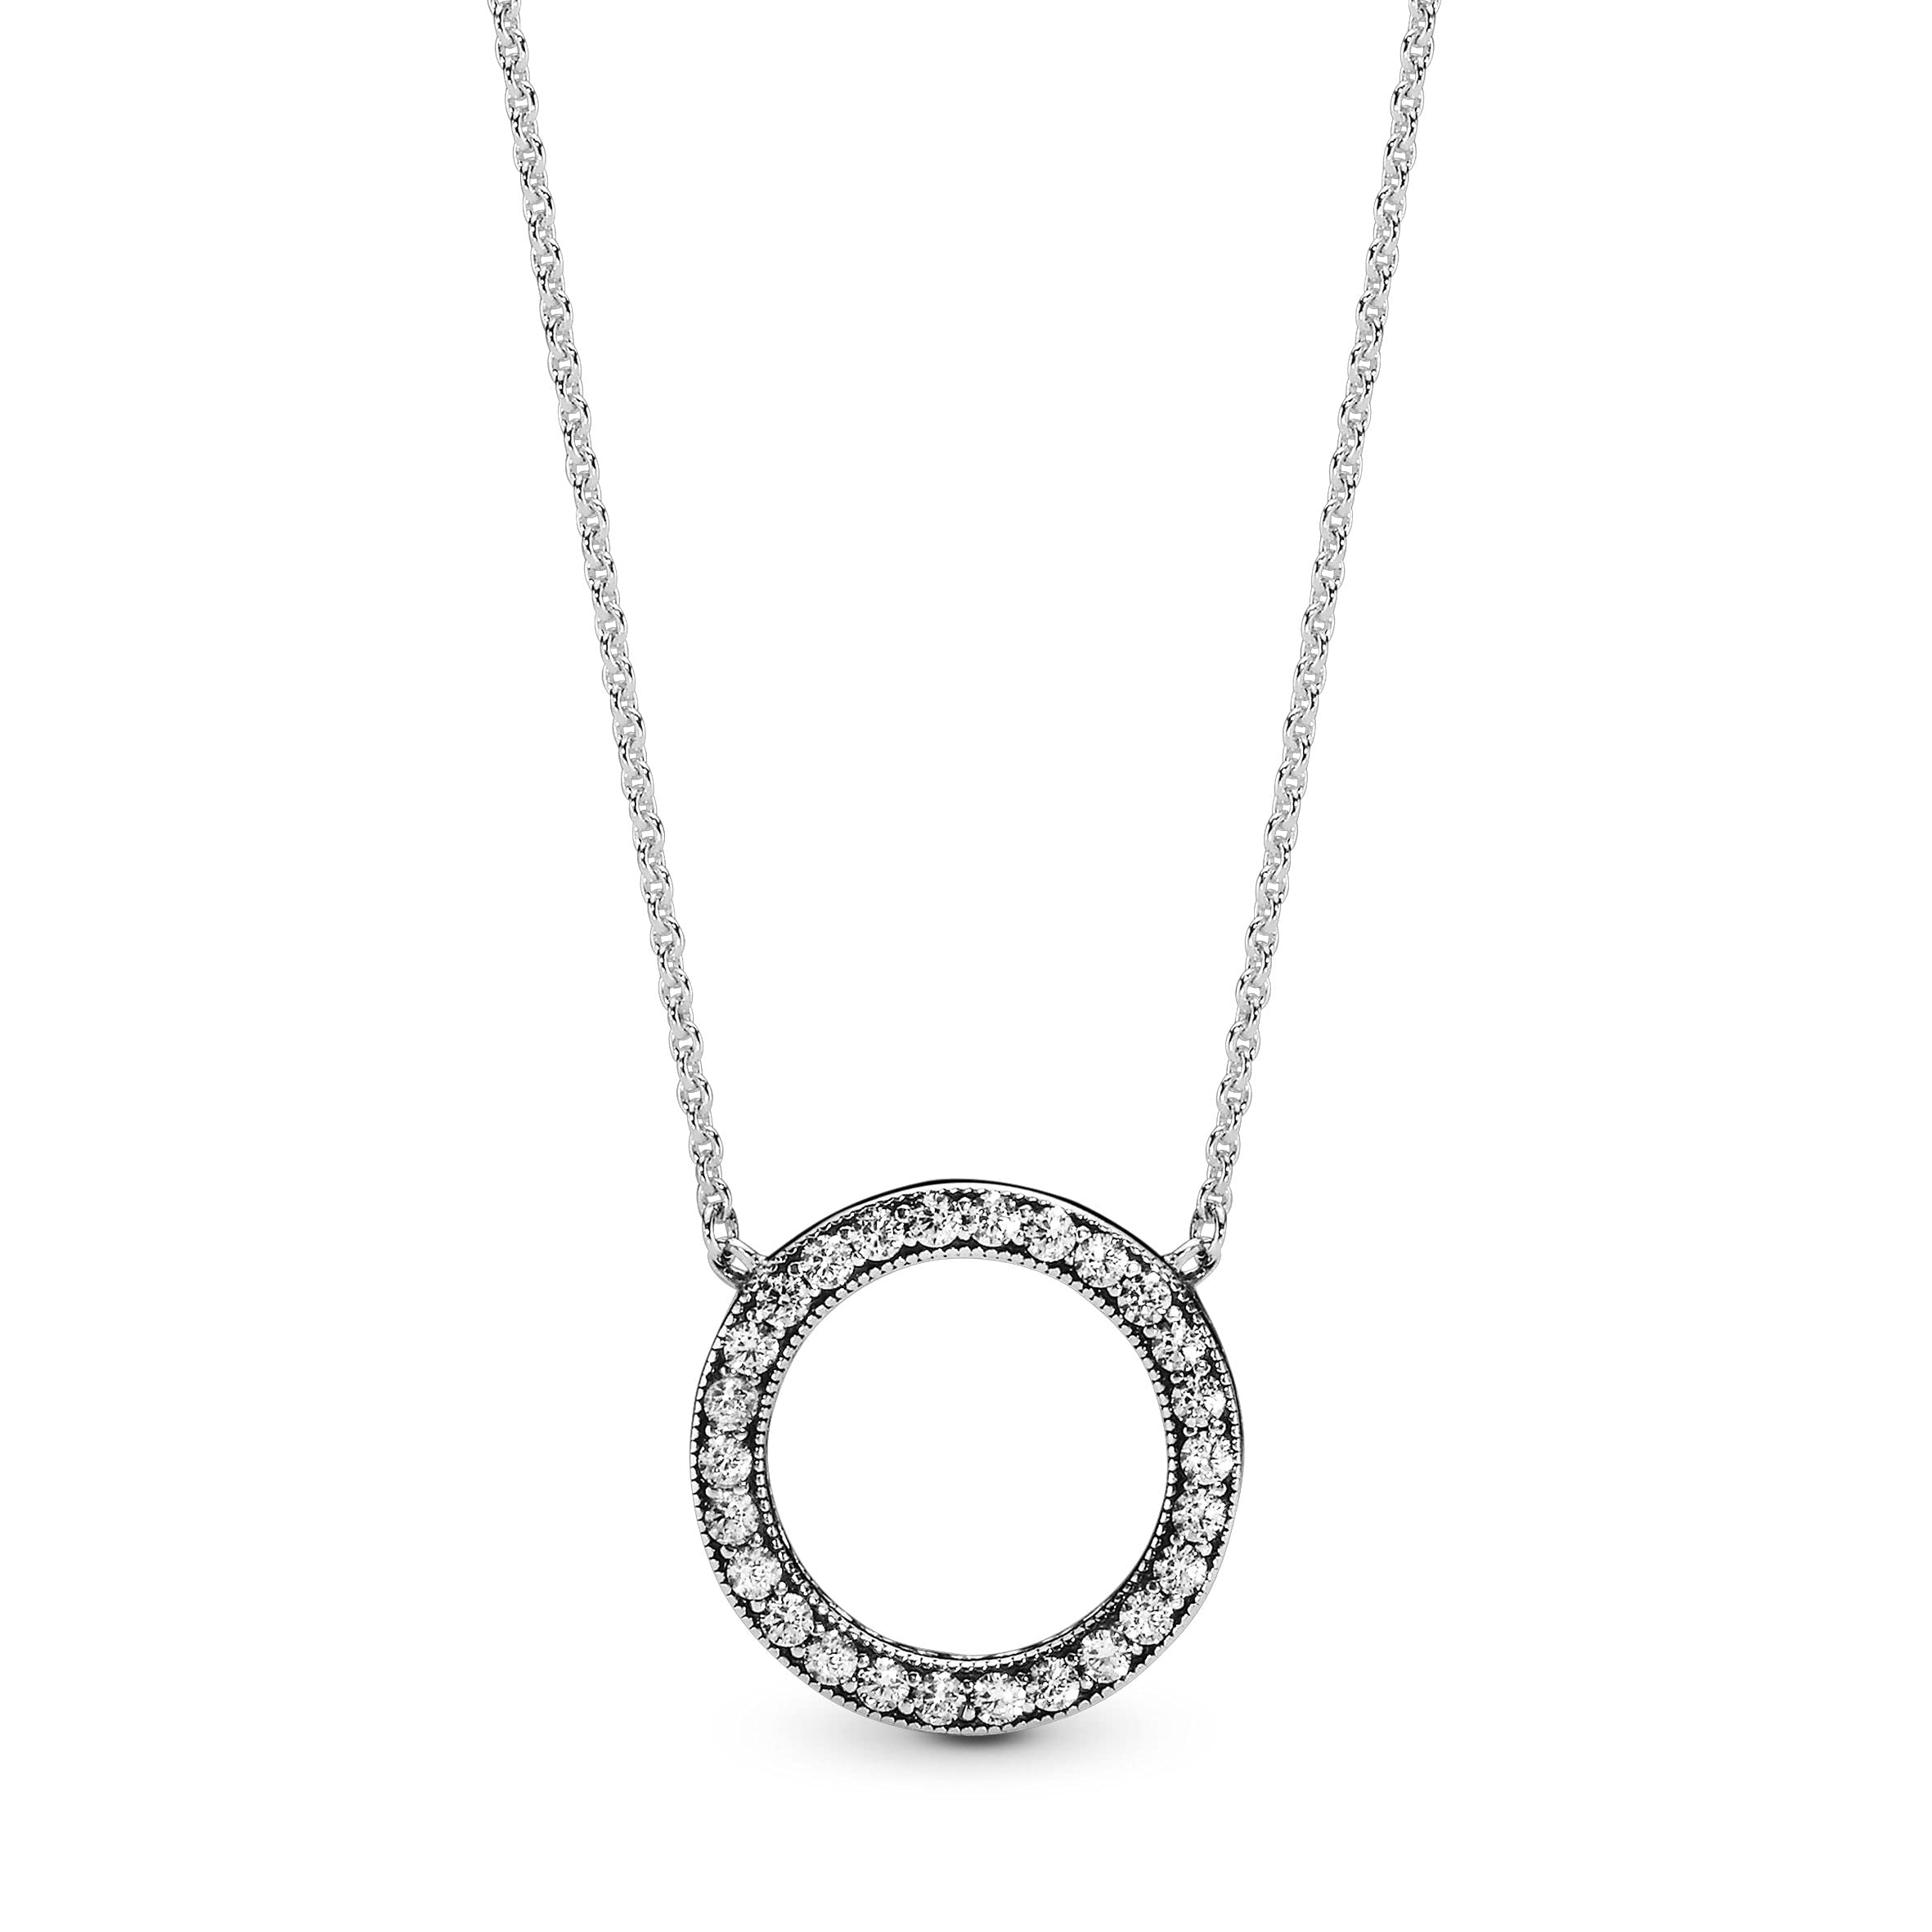 PANDORA Jewelry Circle of Sparkle Cubic Zirconia Necklace in Sterling Silver, 17.7